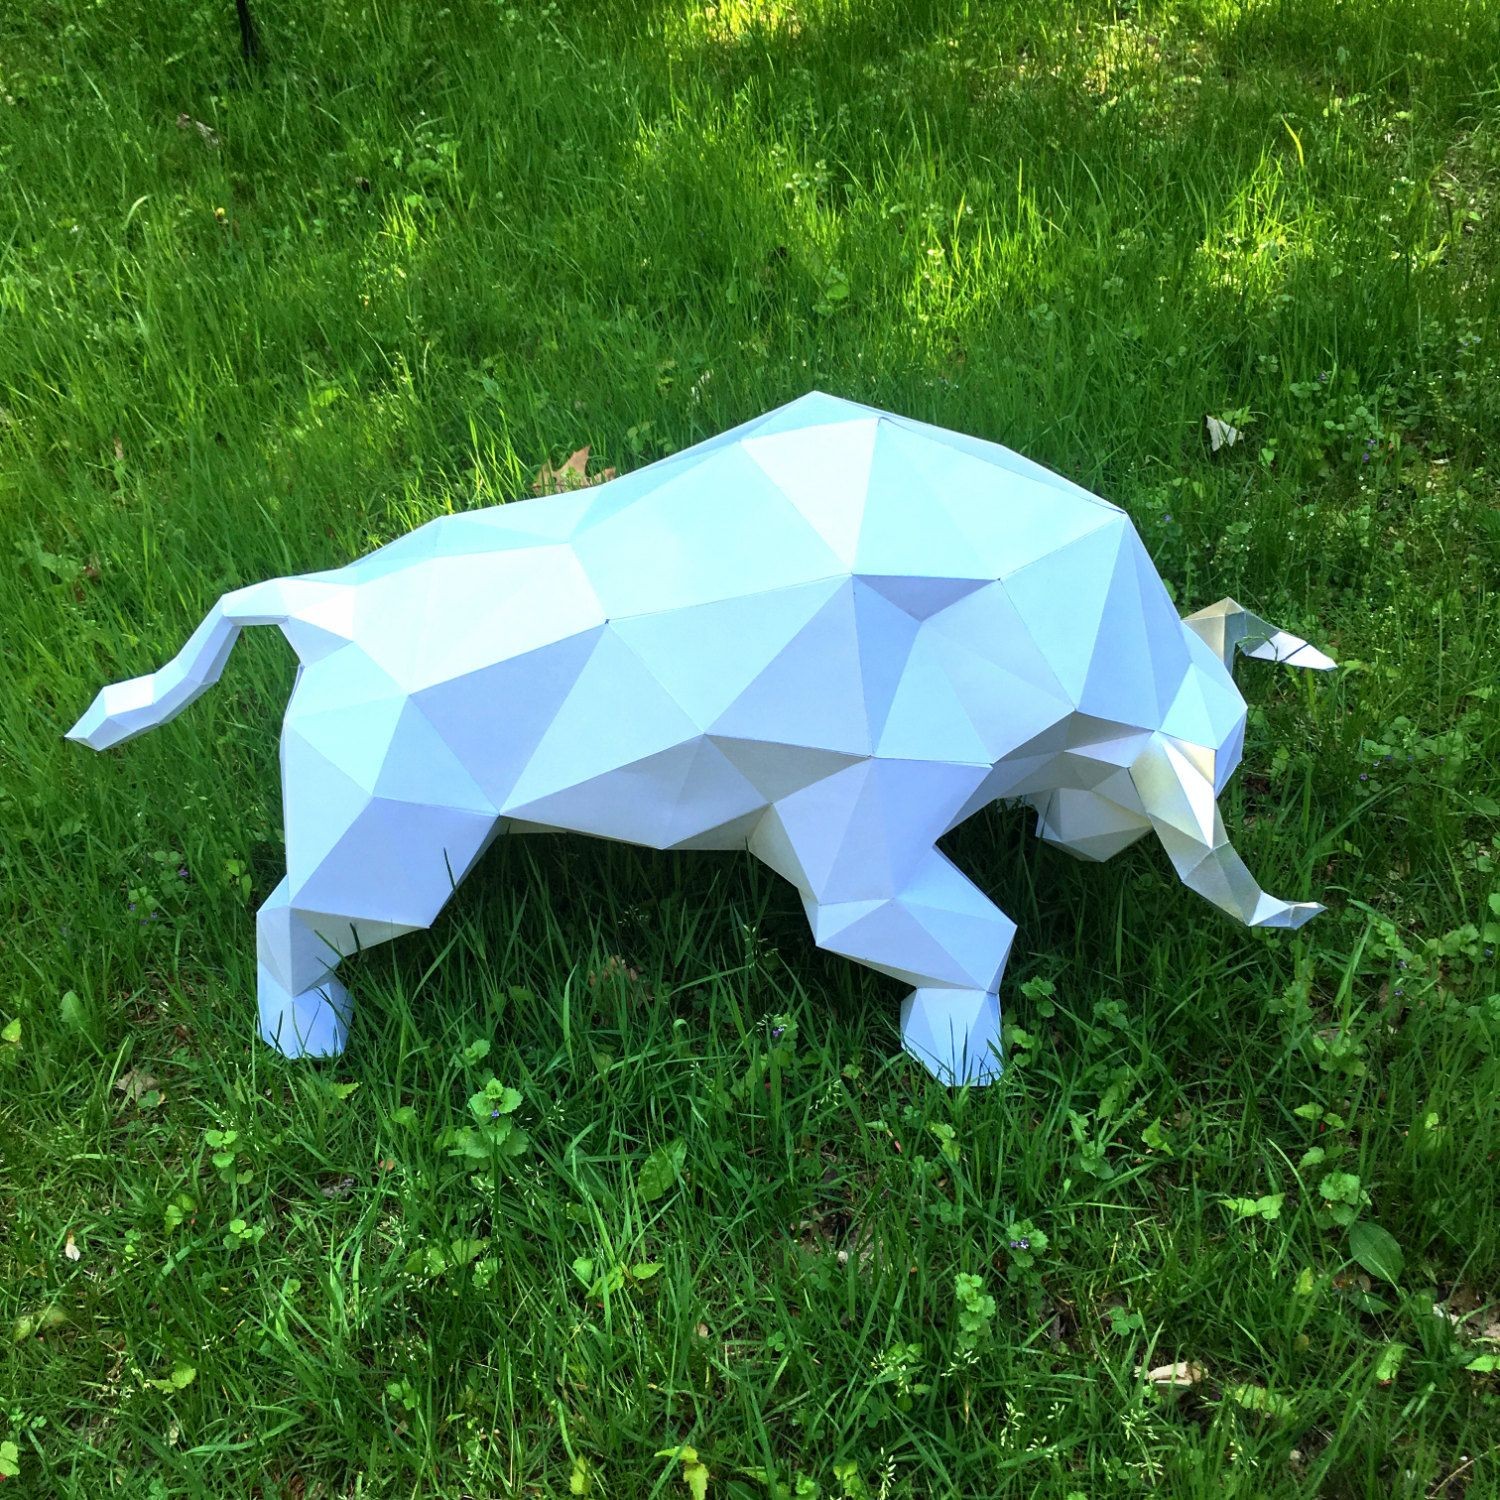 Papercraft Cow Bull Body Papercraft You A Pdf Digital File Templates and